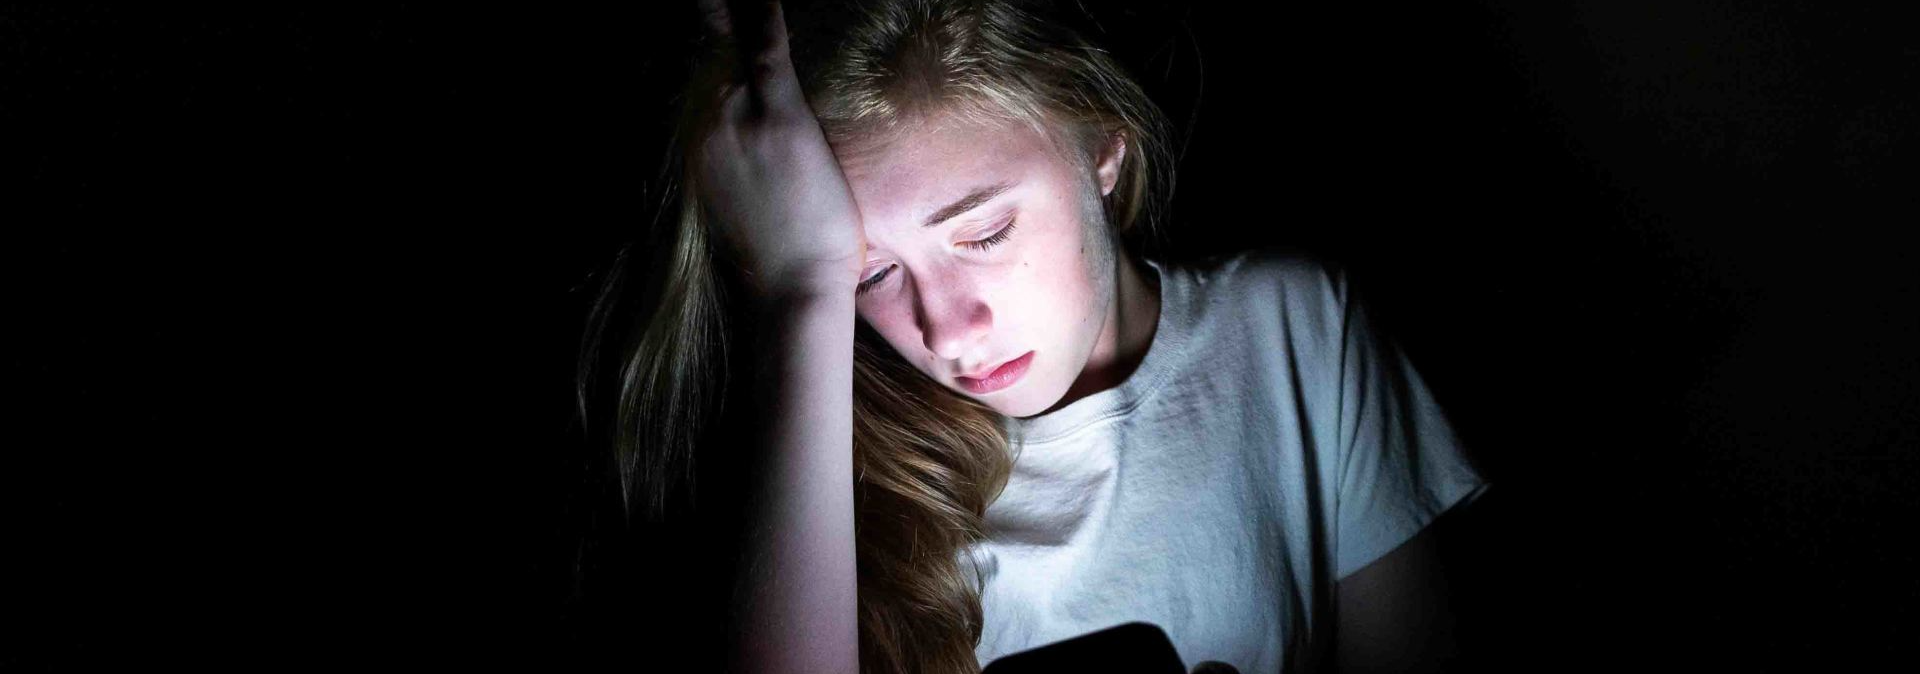 a sad girl in the dark looking at her phone